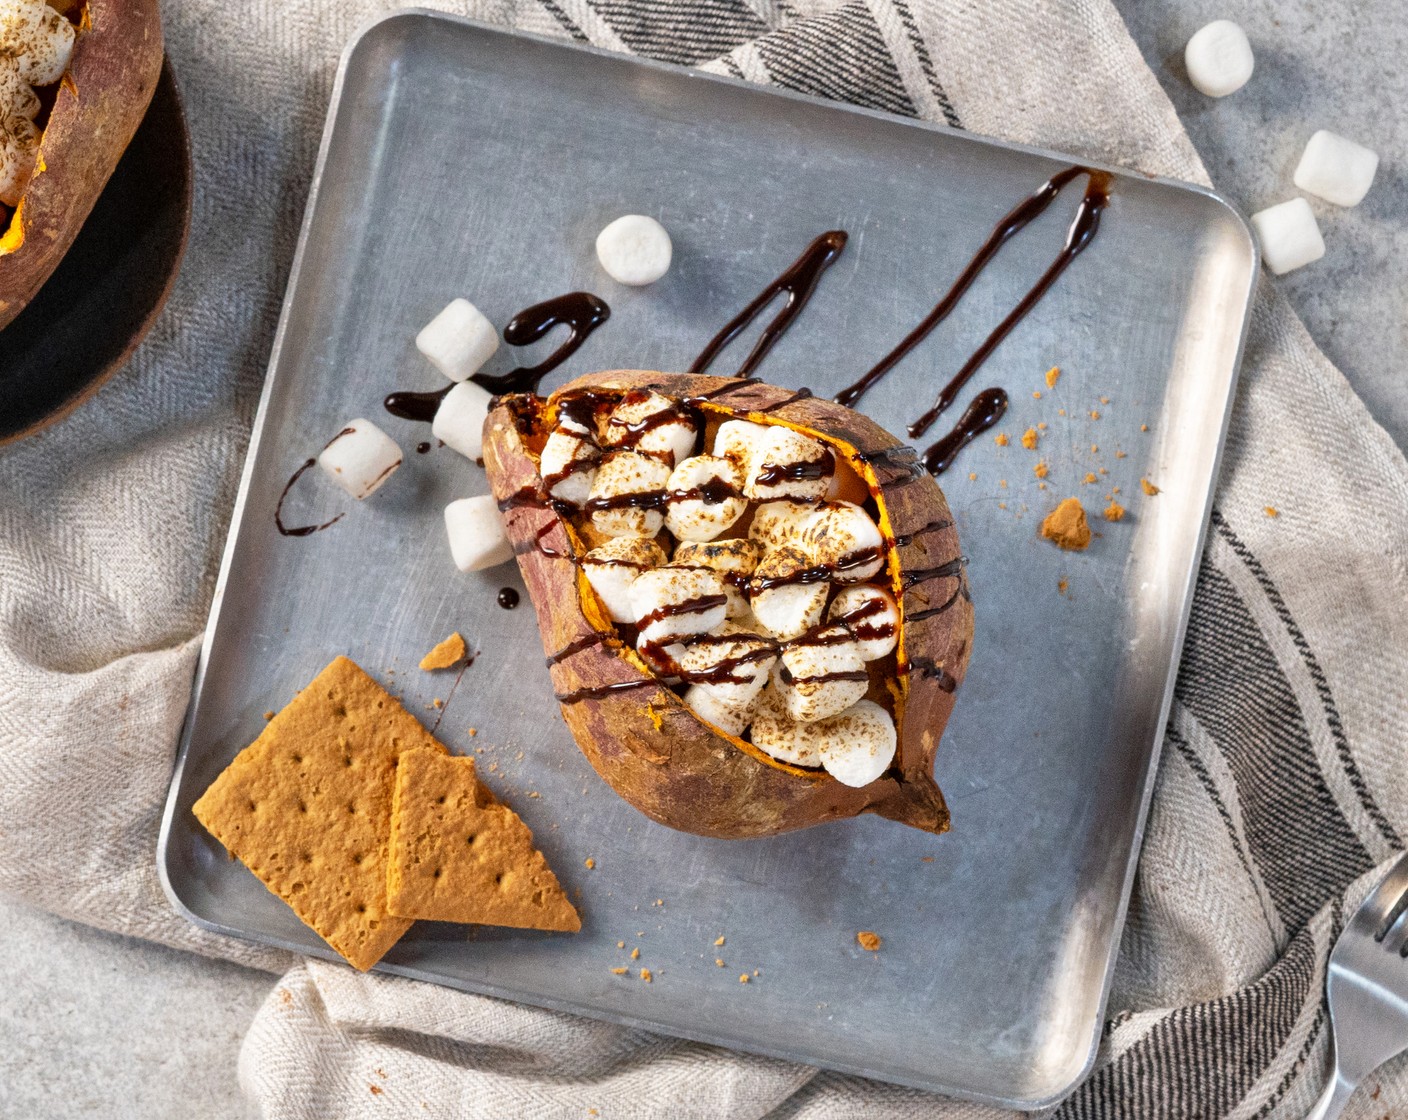 Loaded Sweet Potato with Marshmallow and Chocolate